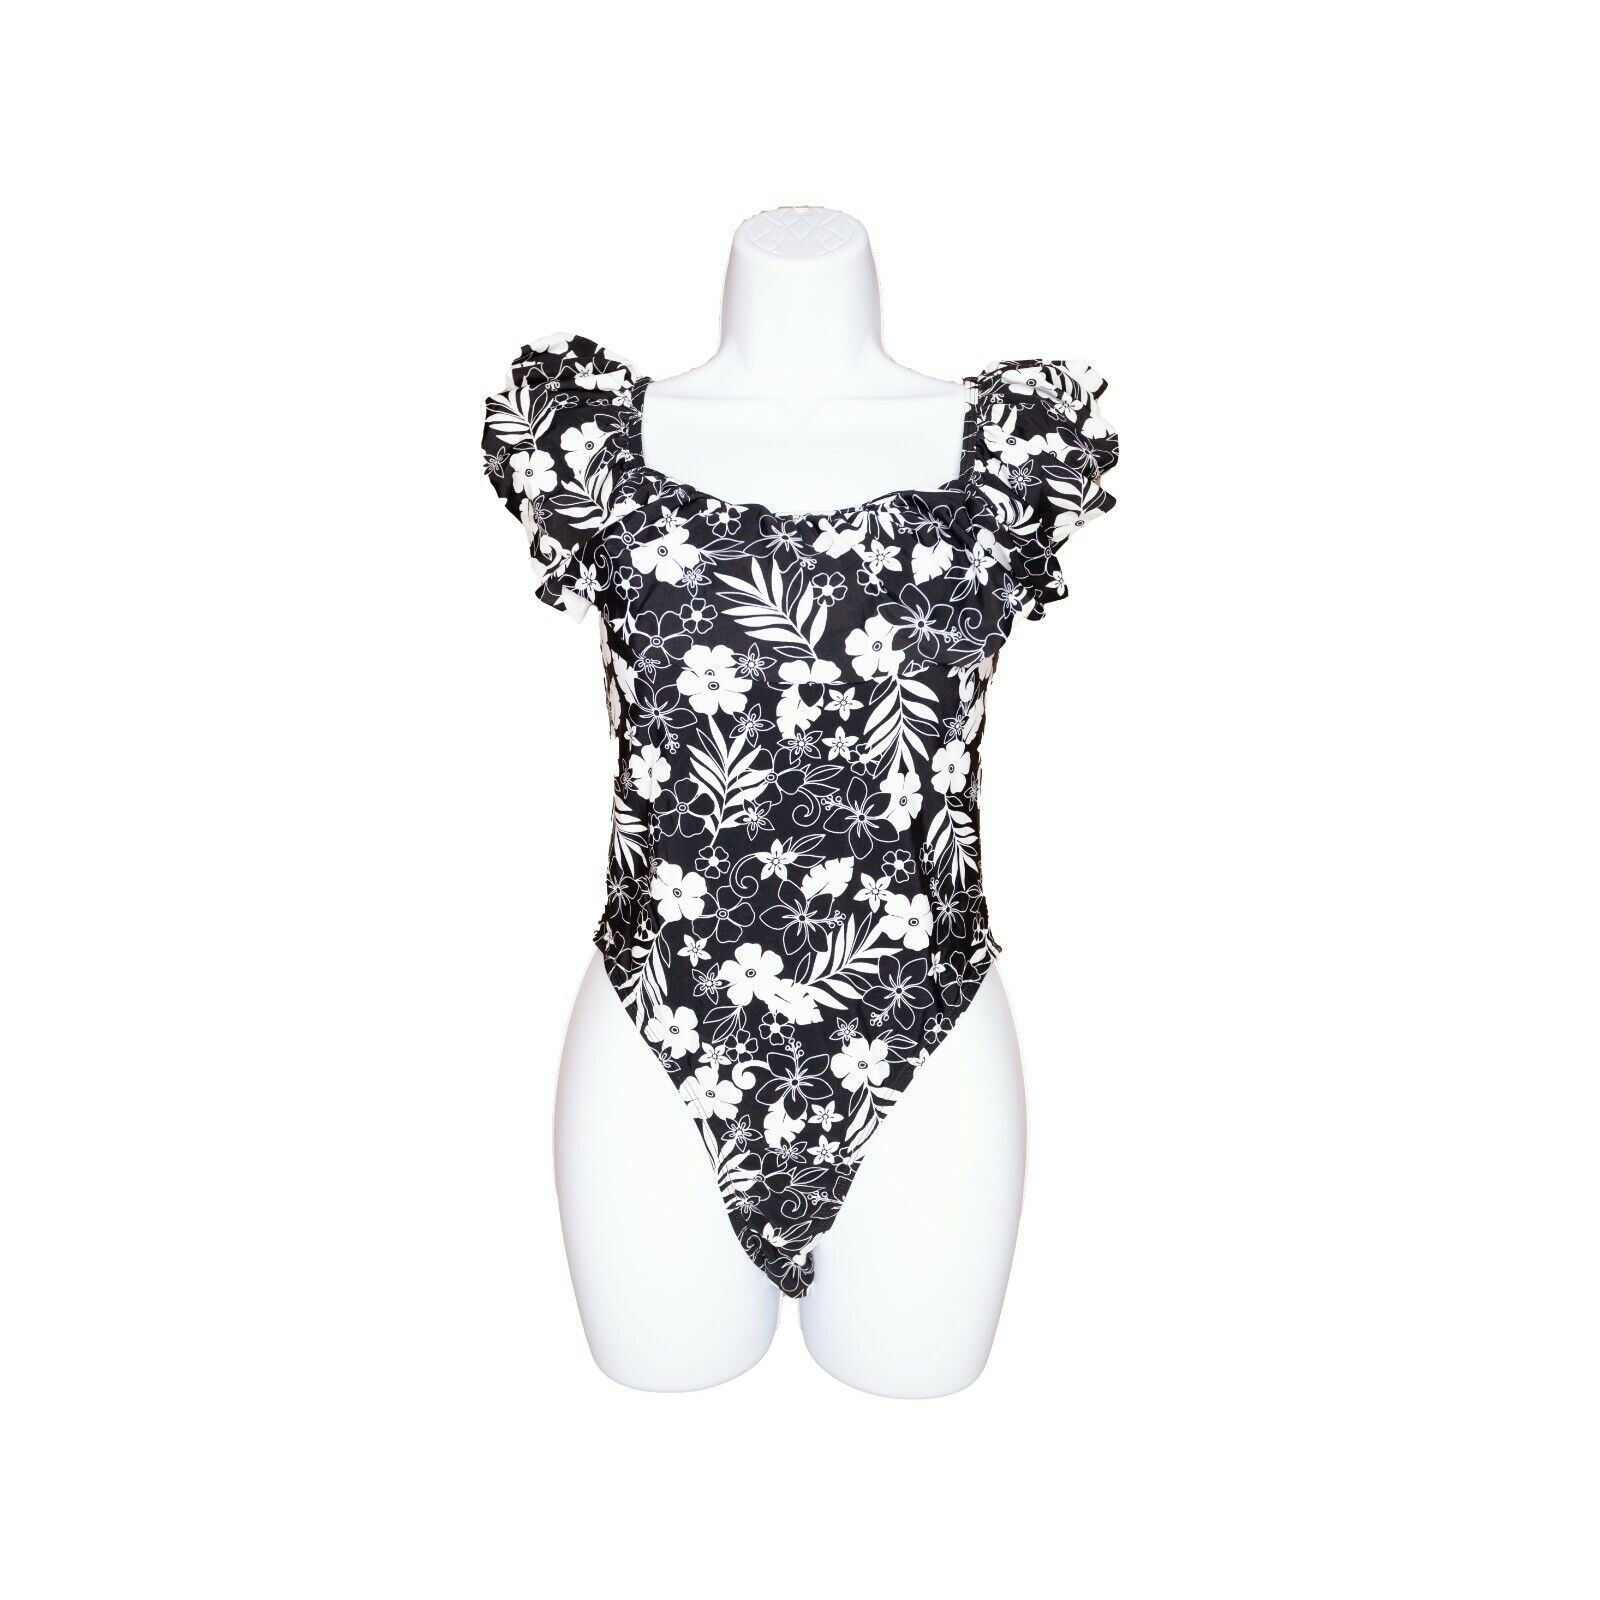 Cabana Del Sol Women Ruffle Off Shoulders In a popularity B One-Piece Floral Great interest The